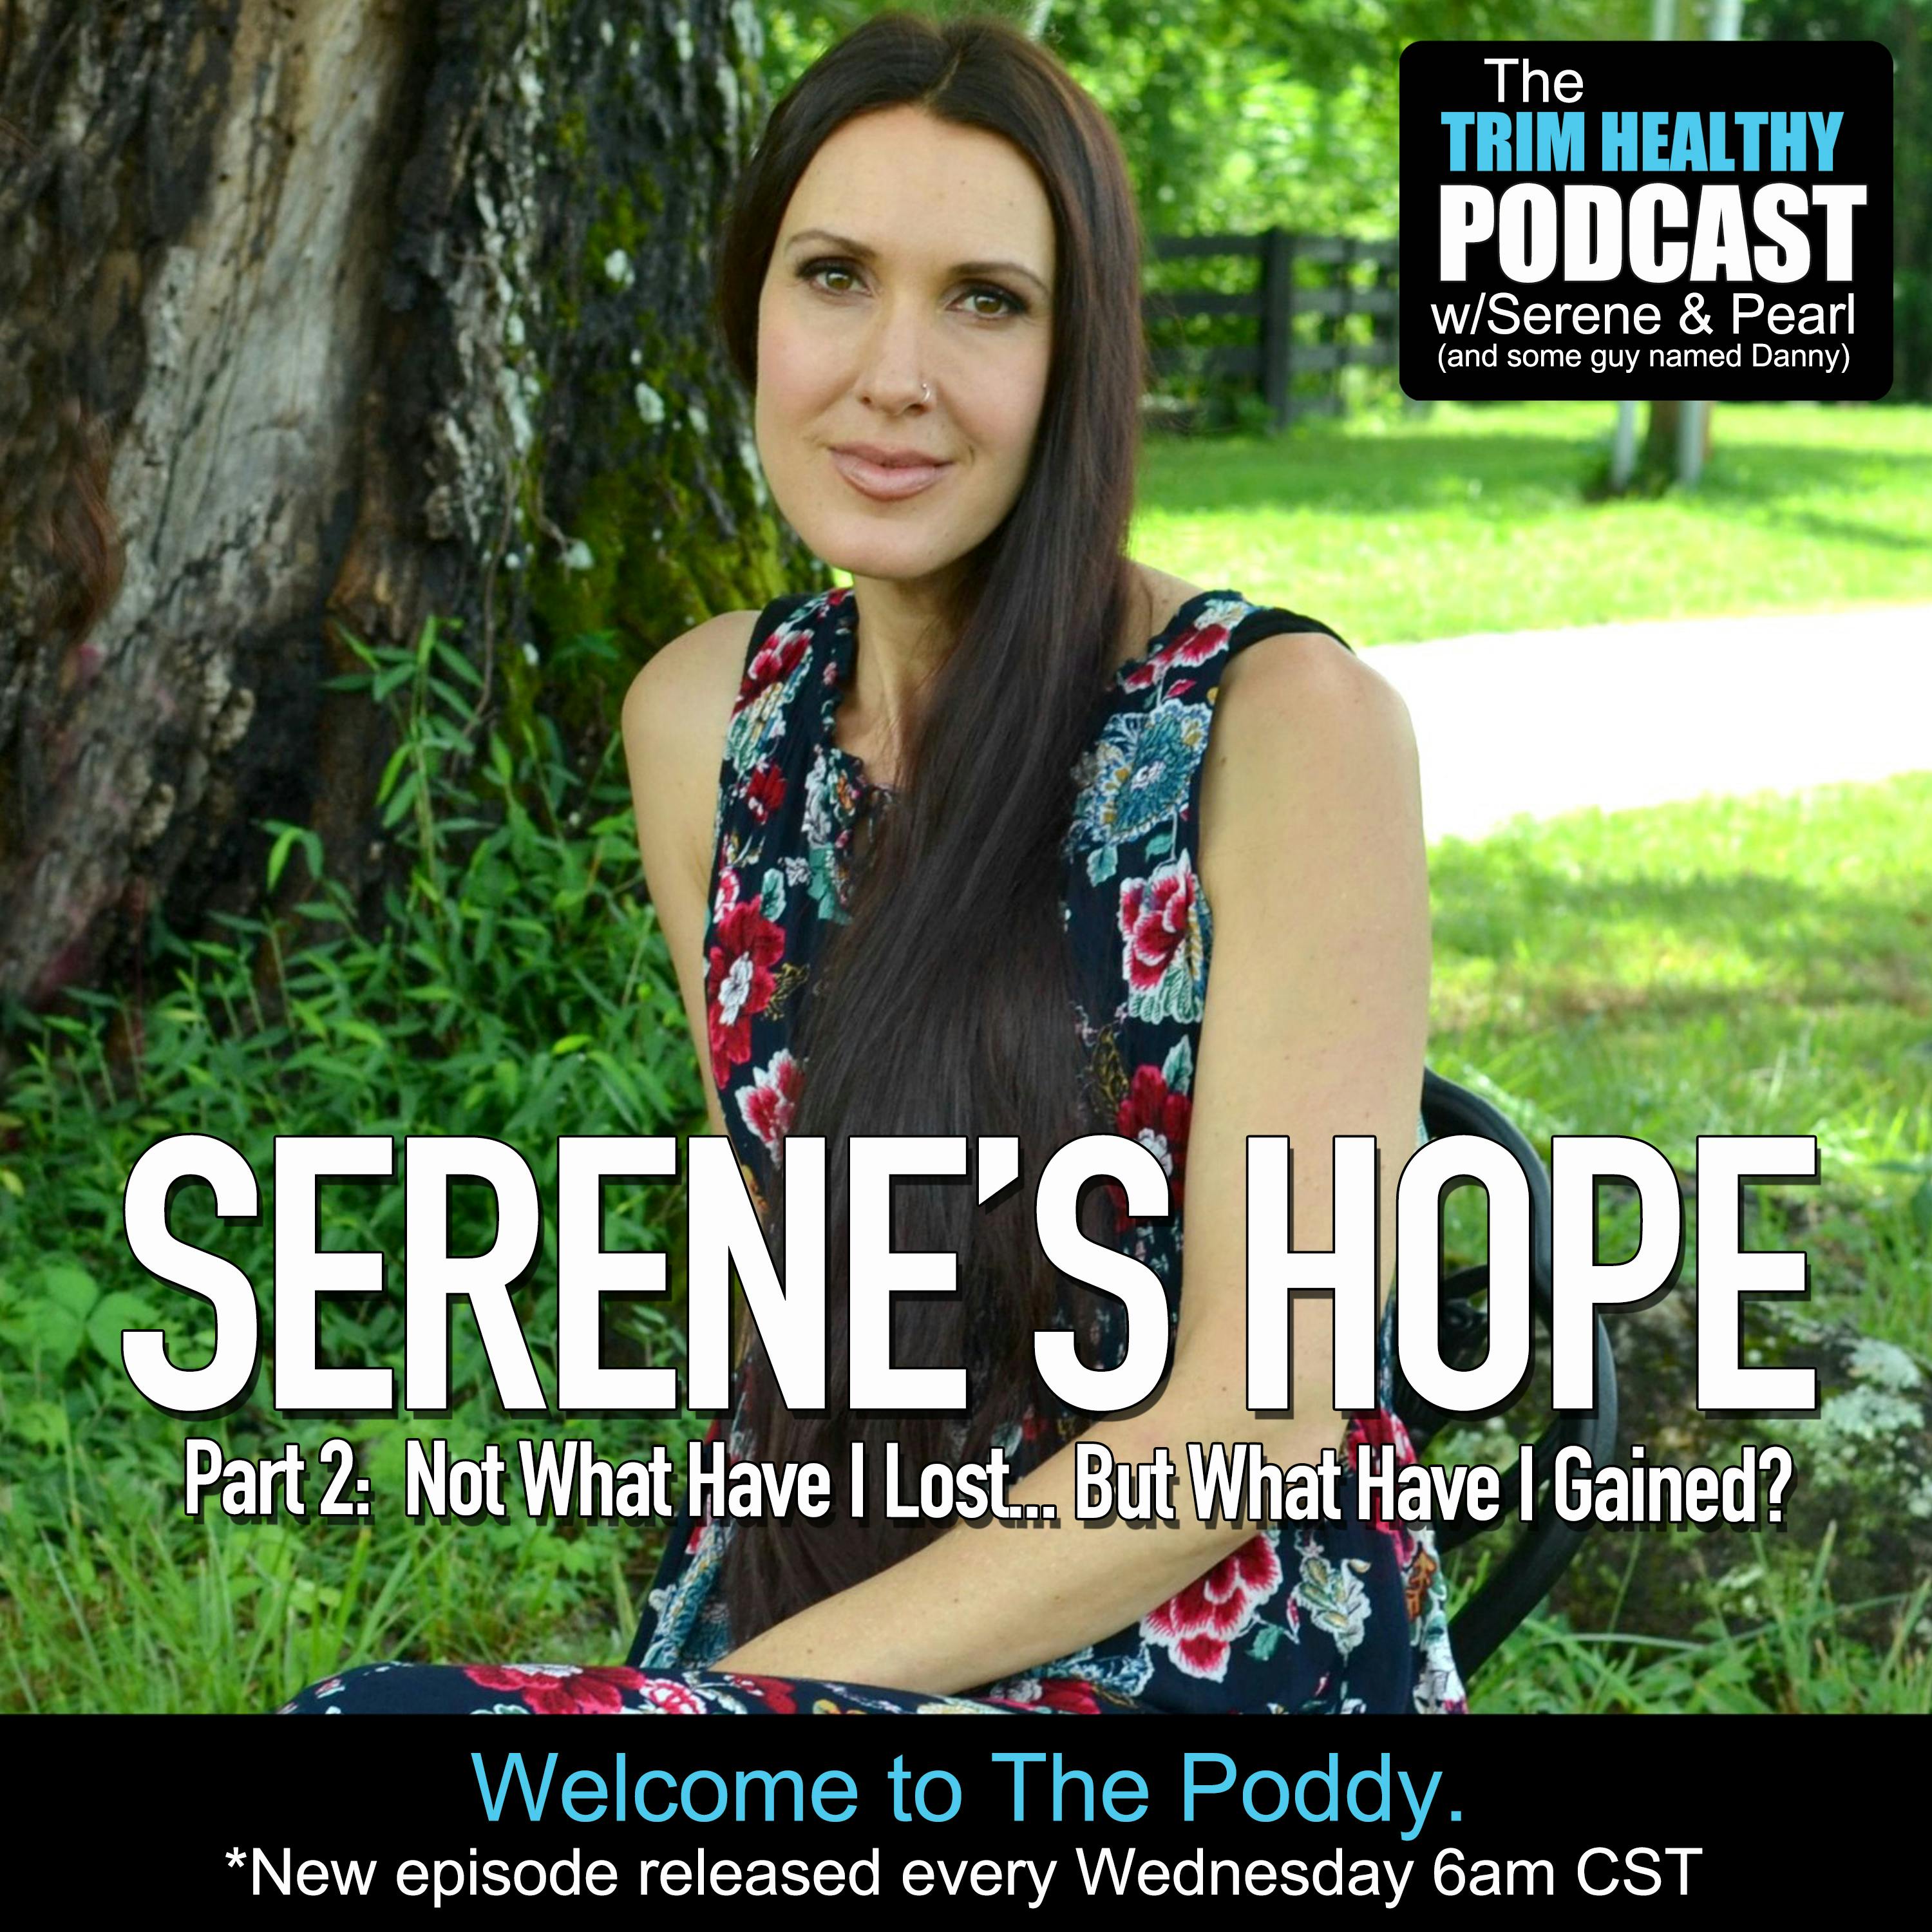 Ep 199: Serene’s Hope Part 2: Not What Have I Lost... But What Have I Gained?